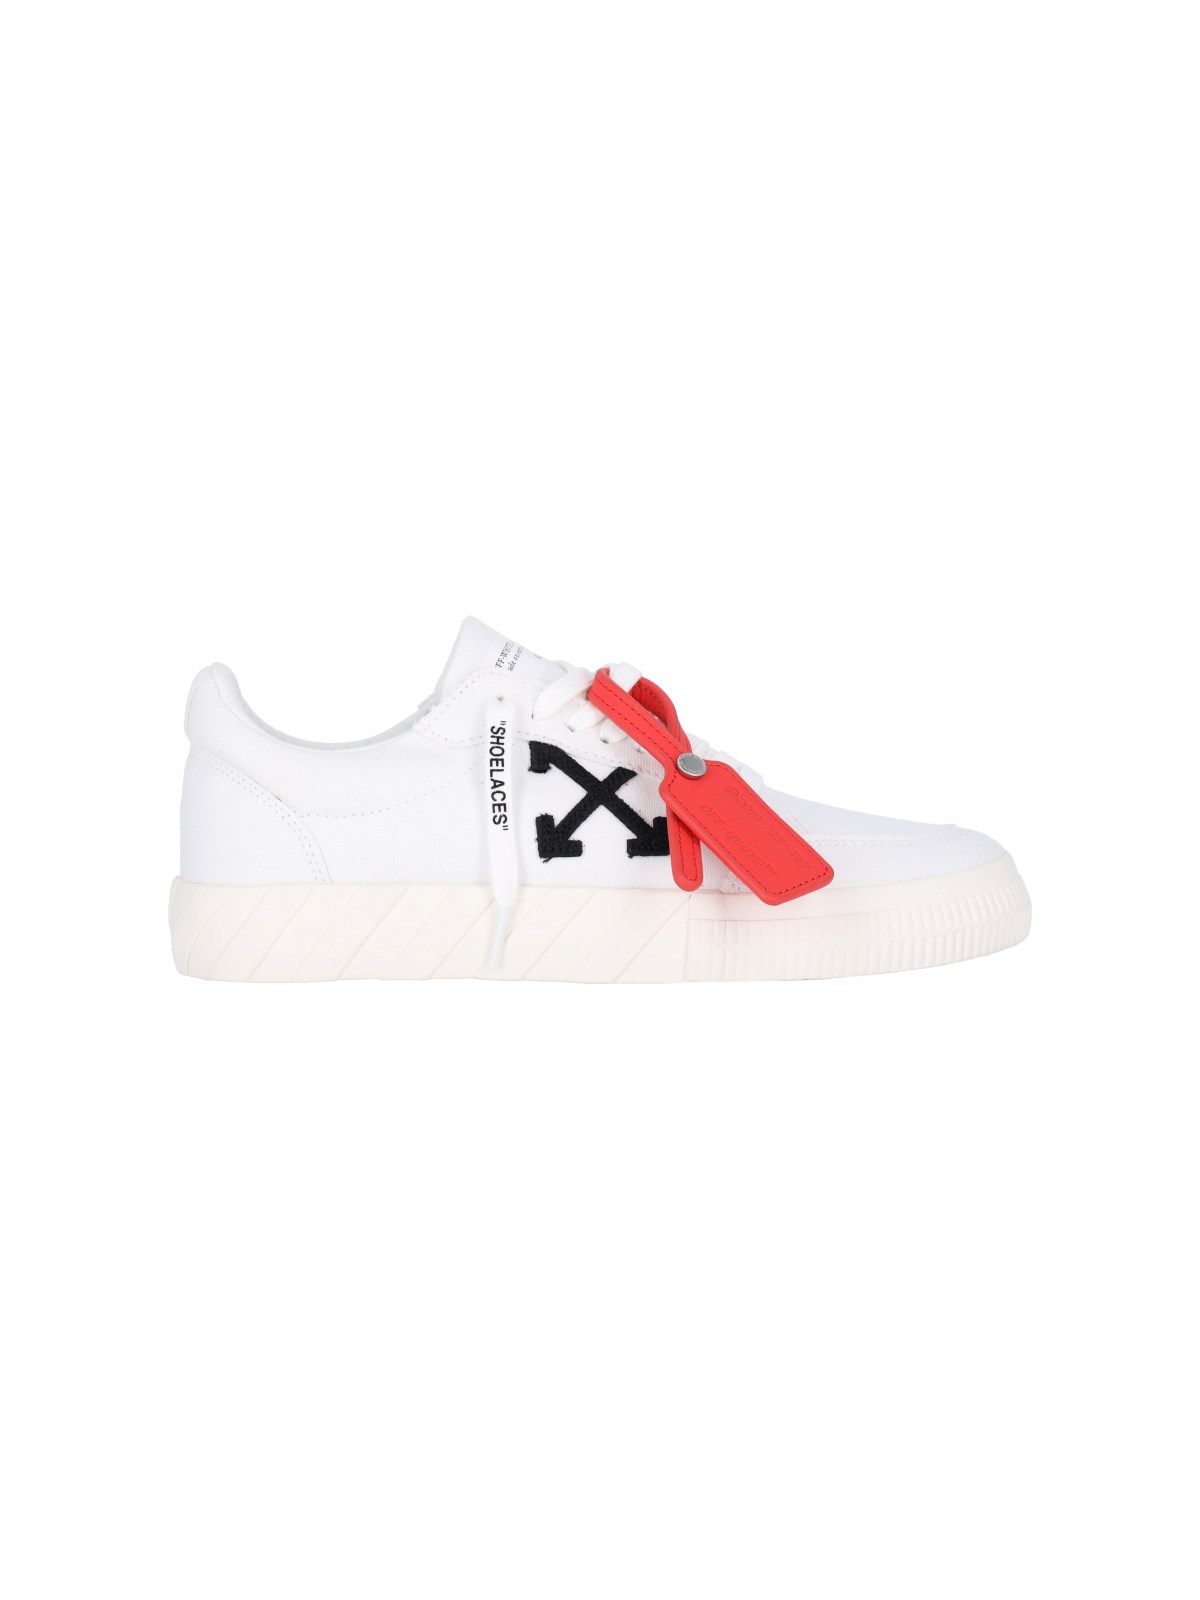 Off-white "vulcanized" Low Sneakers In White